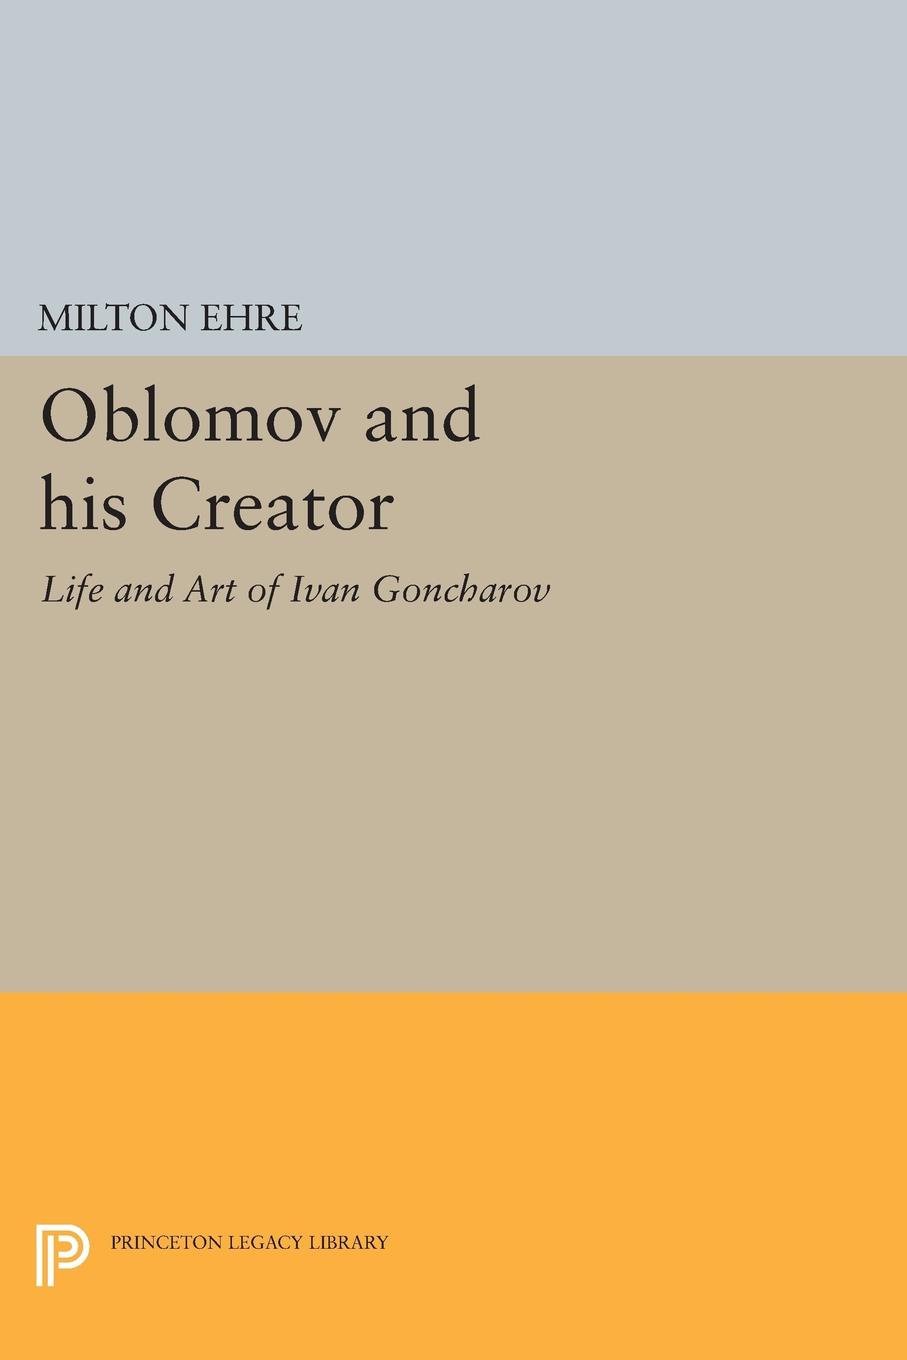 Oblomov and his Creator. Life and Art of Ivan Goncharov